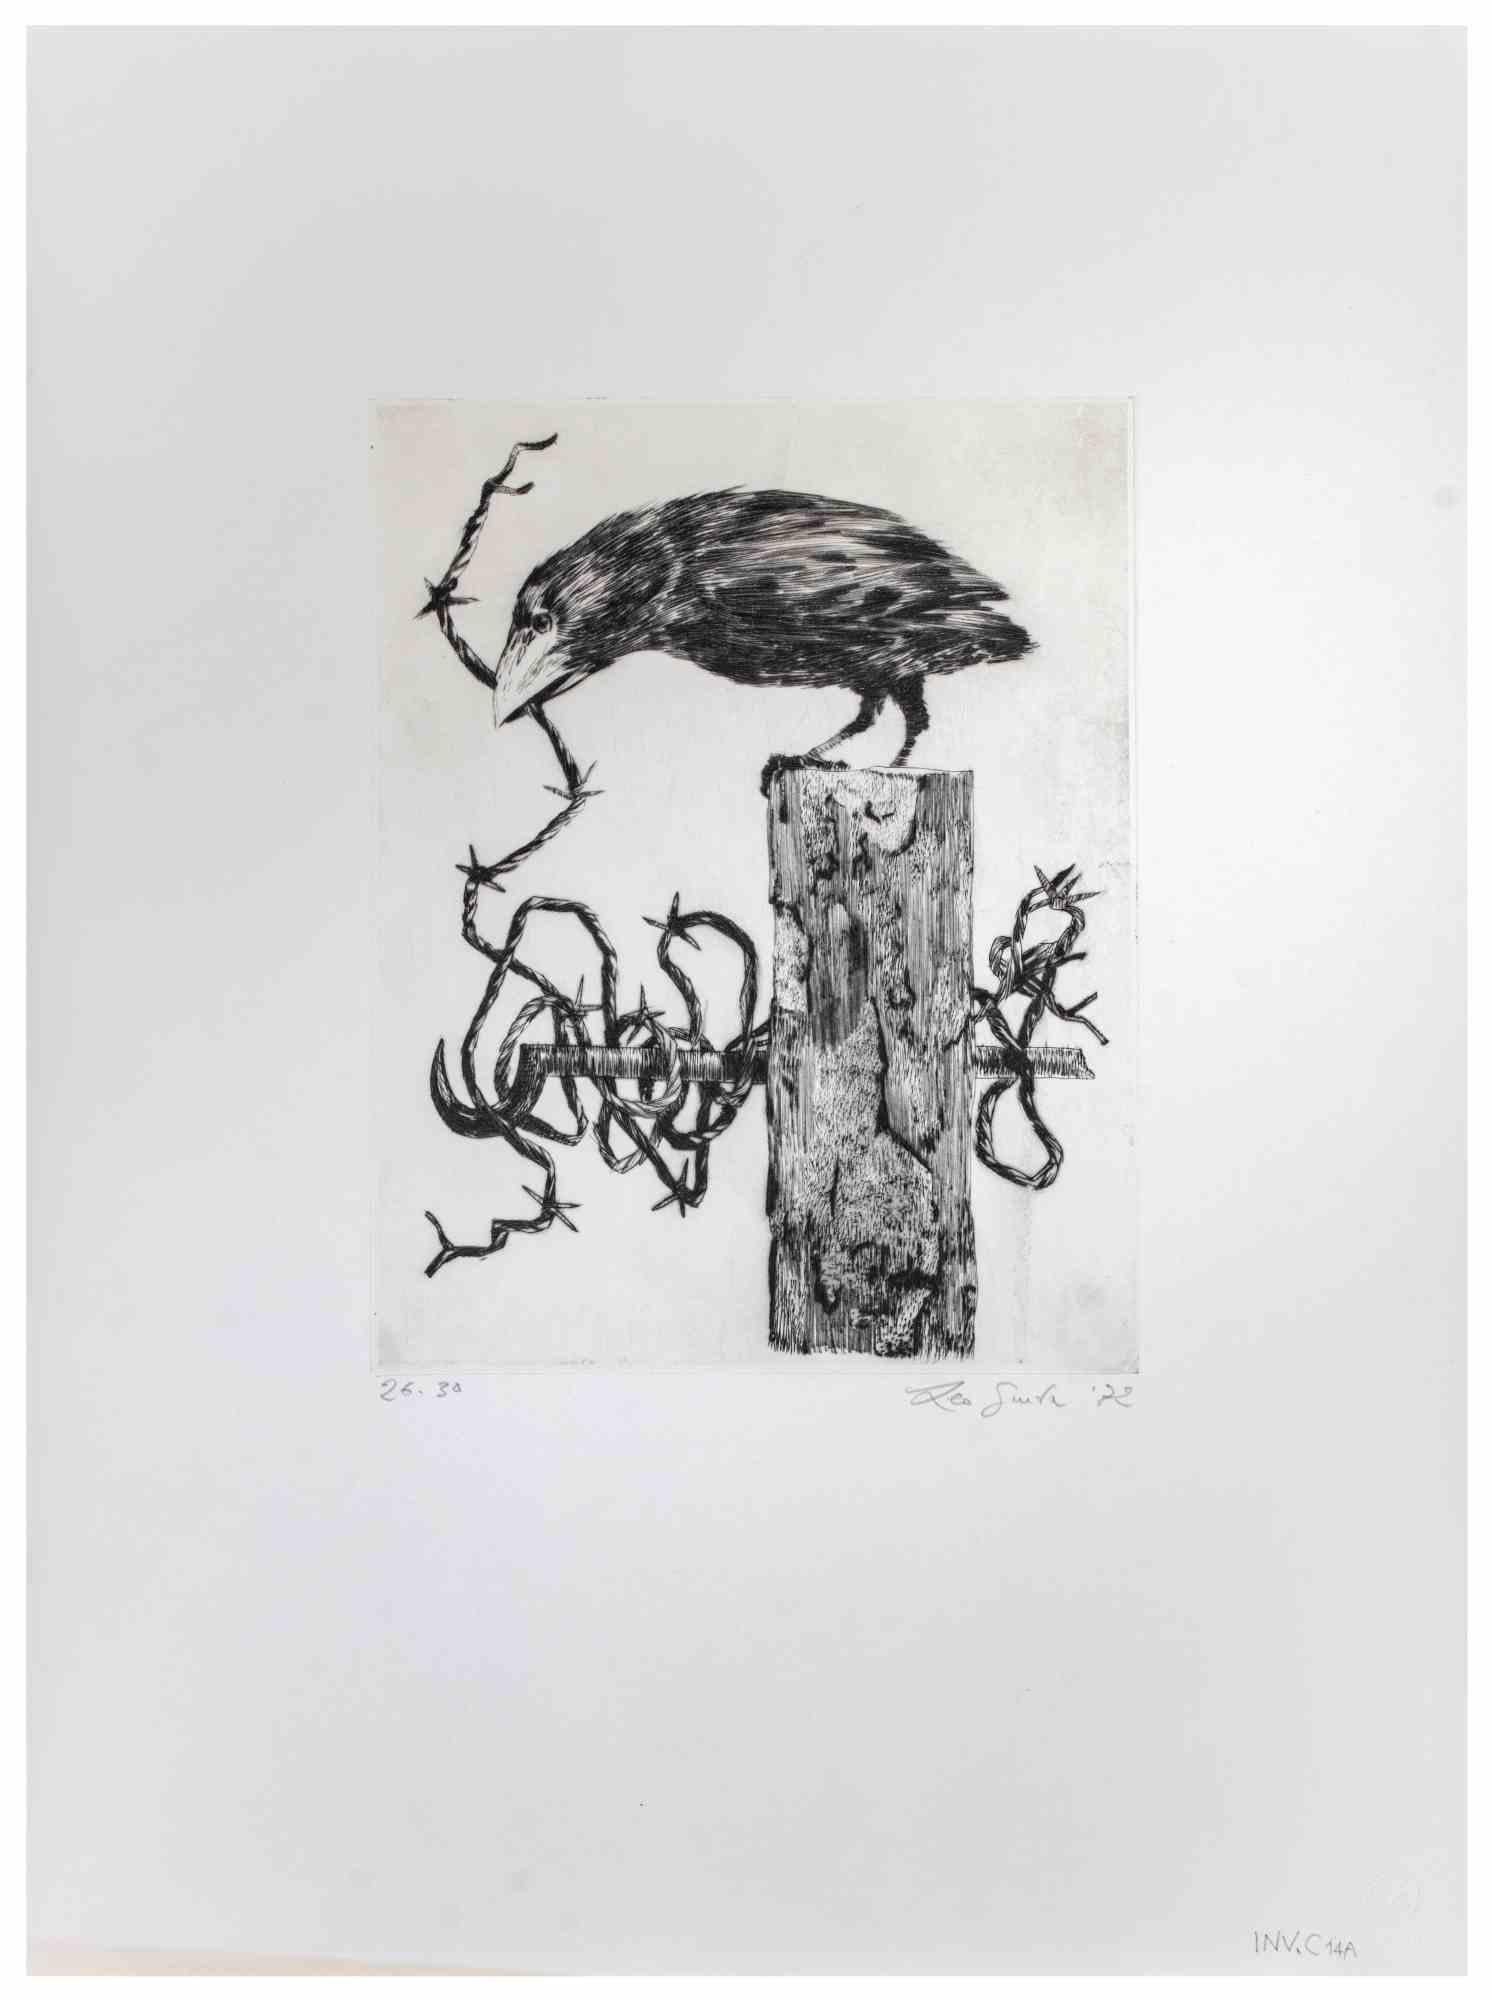 Crow is an artwork realized by the Contemporary Italian artist  Leo Guida (1992 - 2017) in 1972.

Black and white etching on paper.

Hand Signed on the lower right margin, dated and numbered, edition of 30 prints on the lower left margin. 

Very